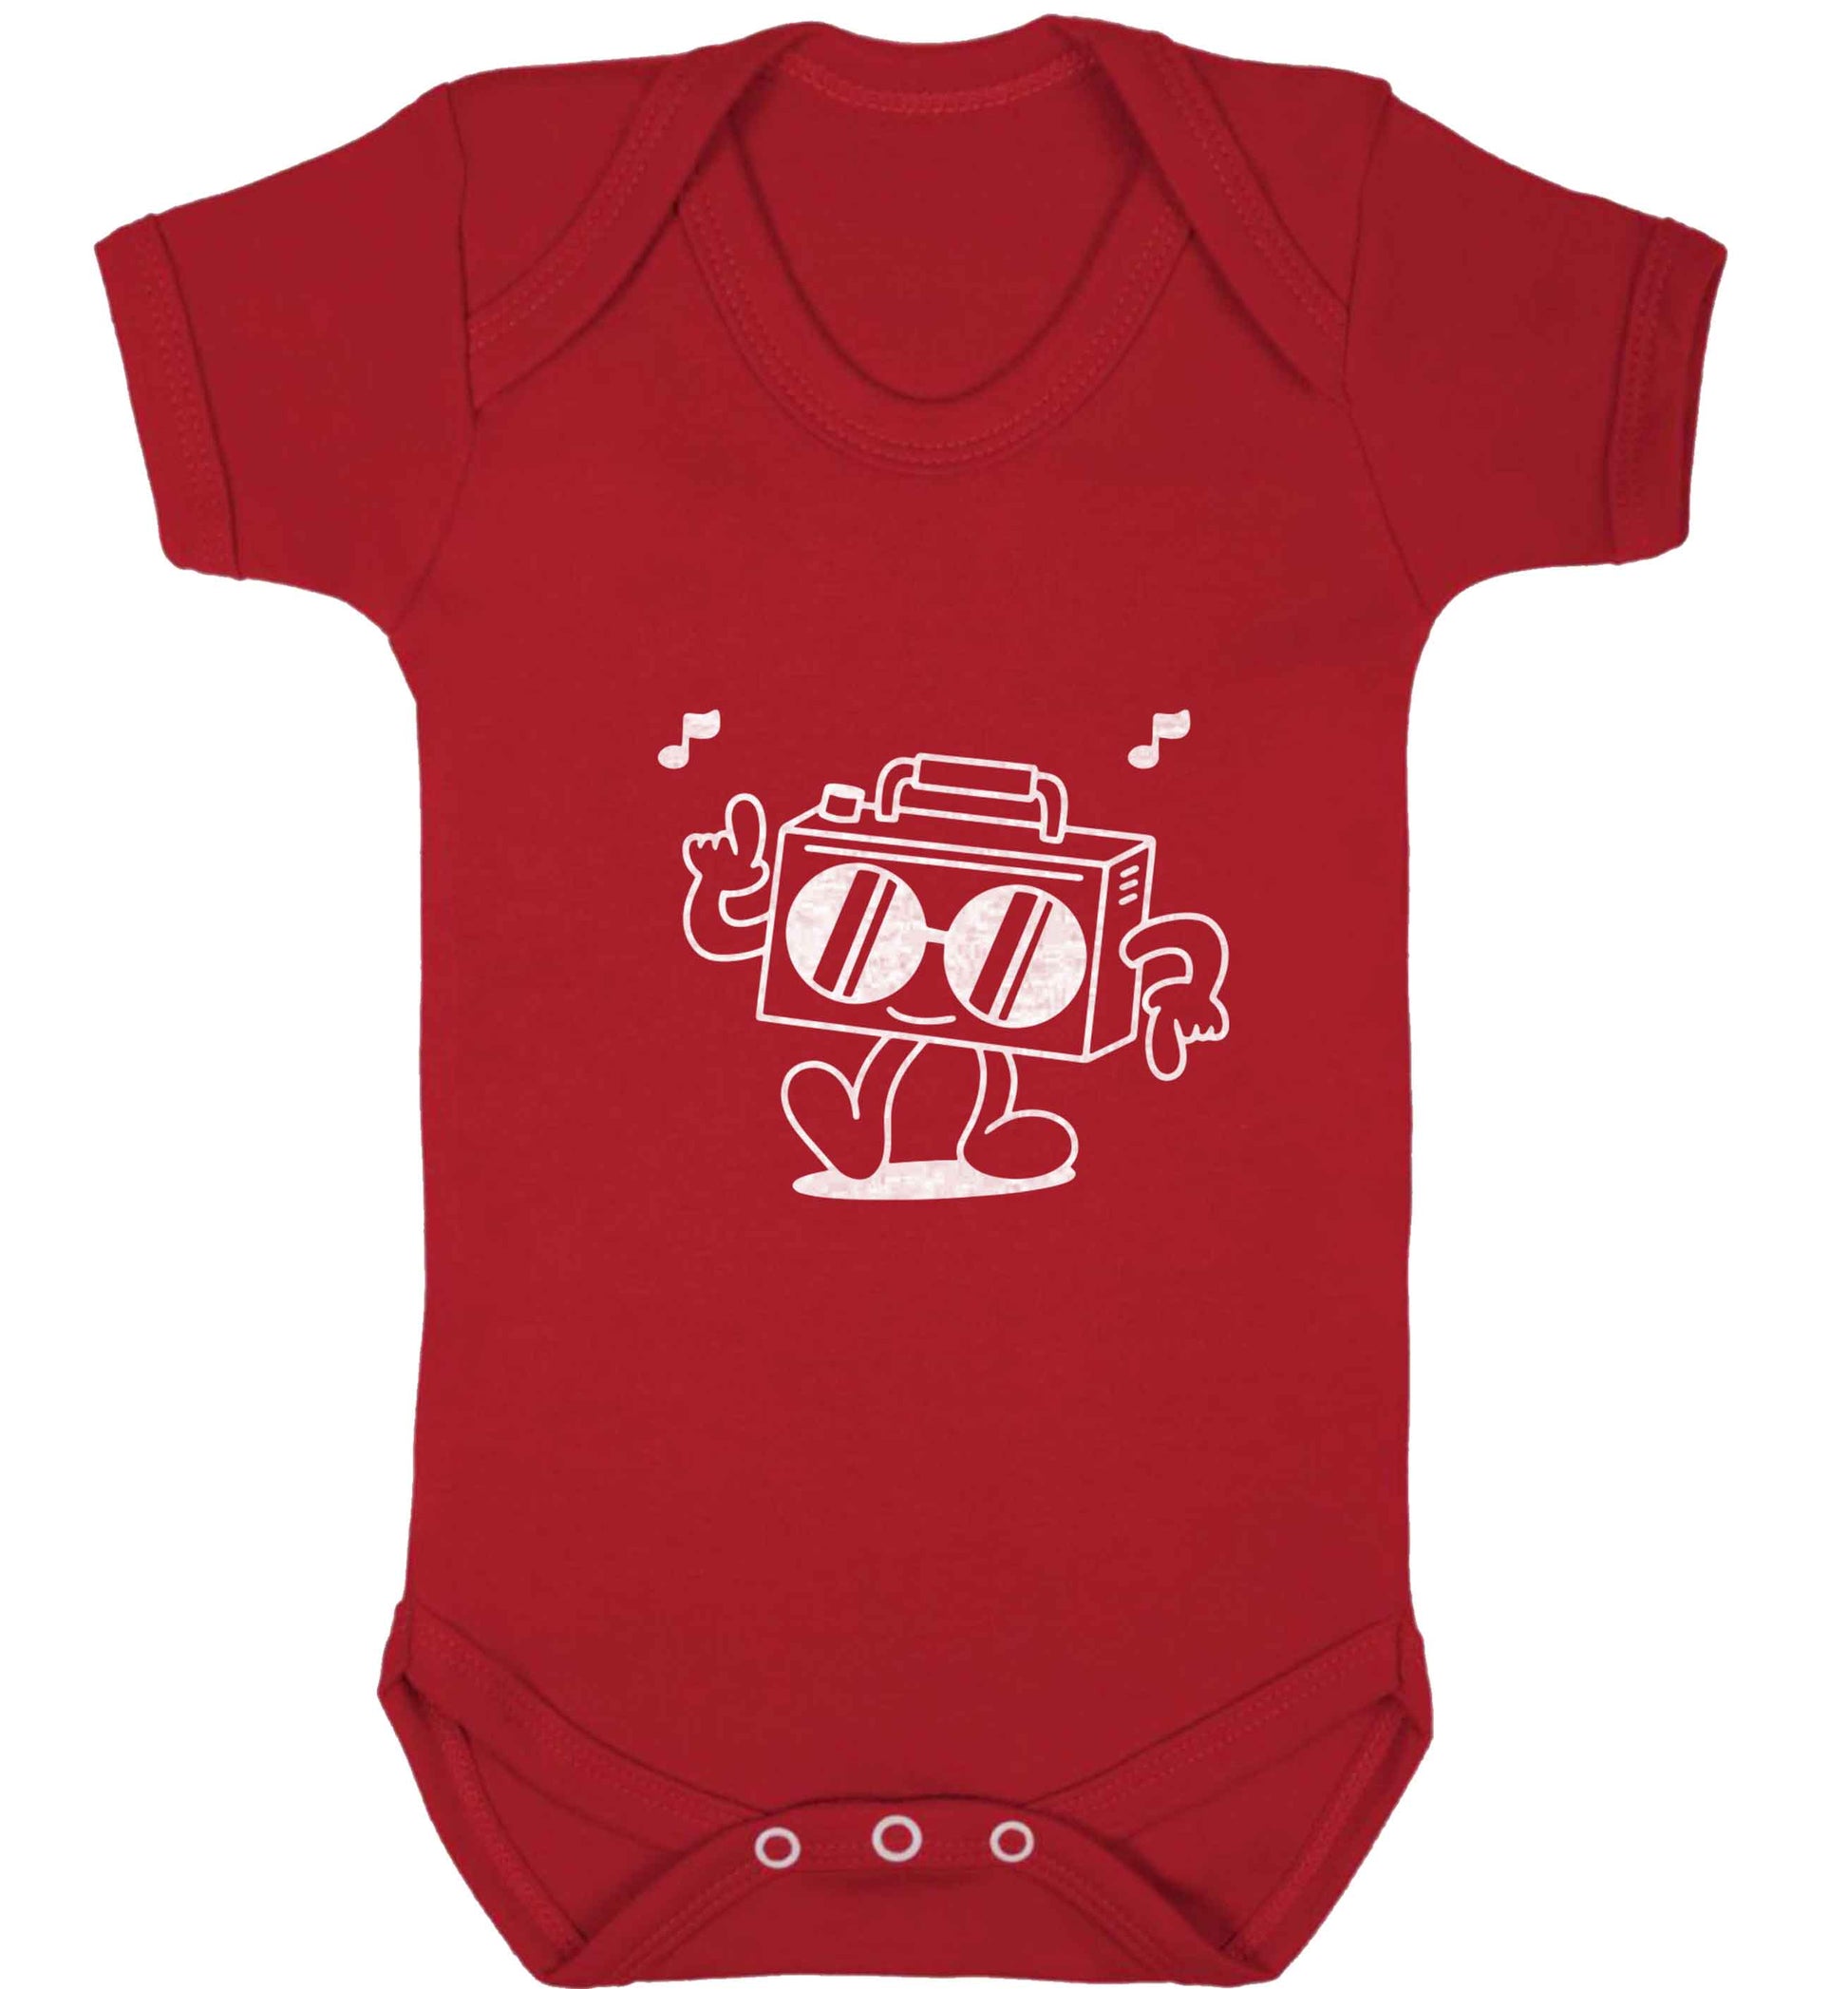 Boombox baby vest red 18-24 months